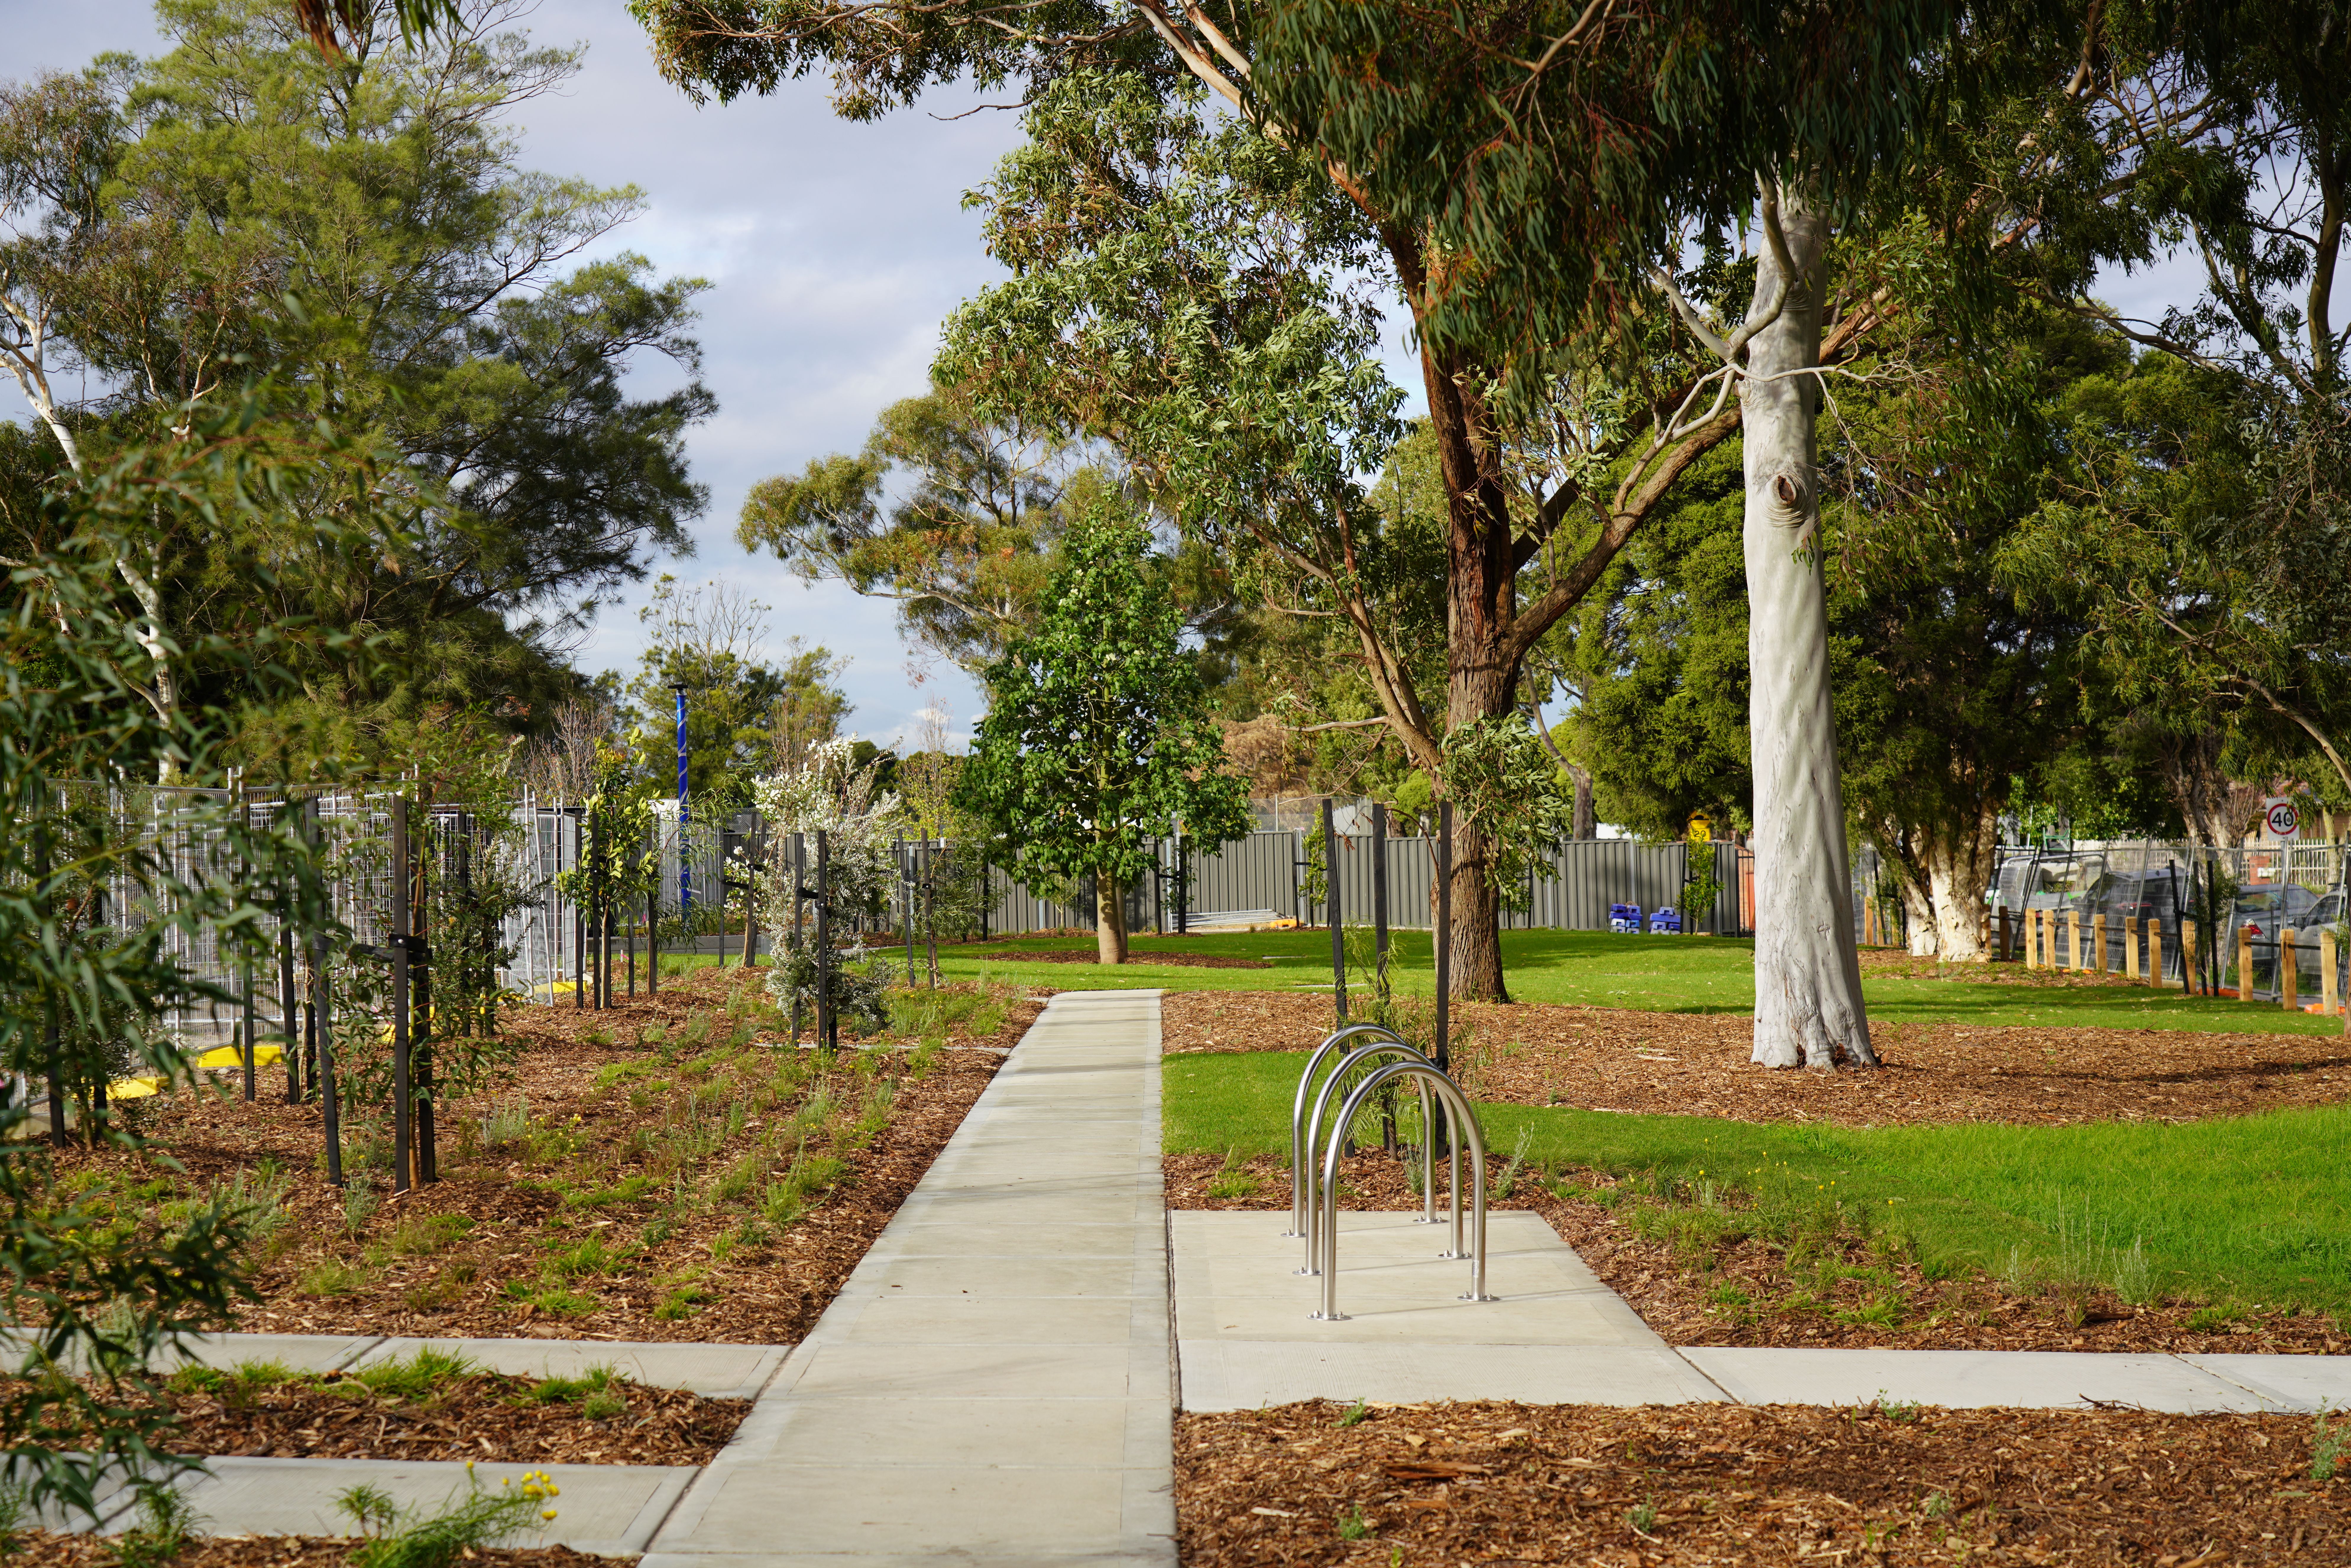 Coomoora Springvale South open space with trees, grass and bike racks